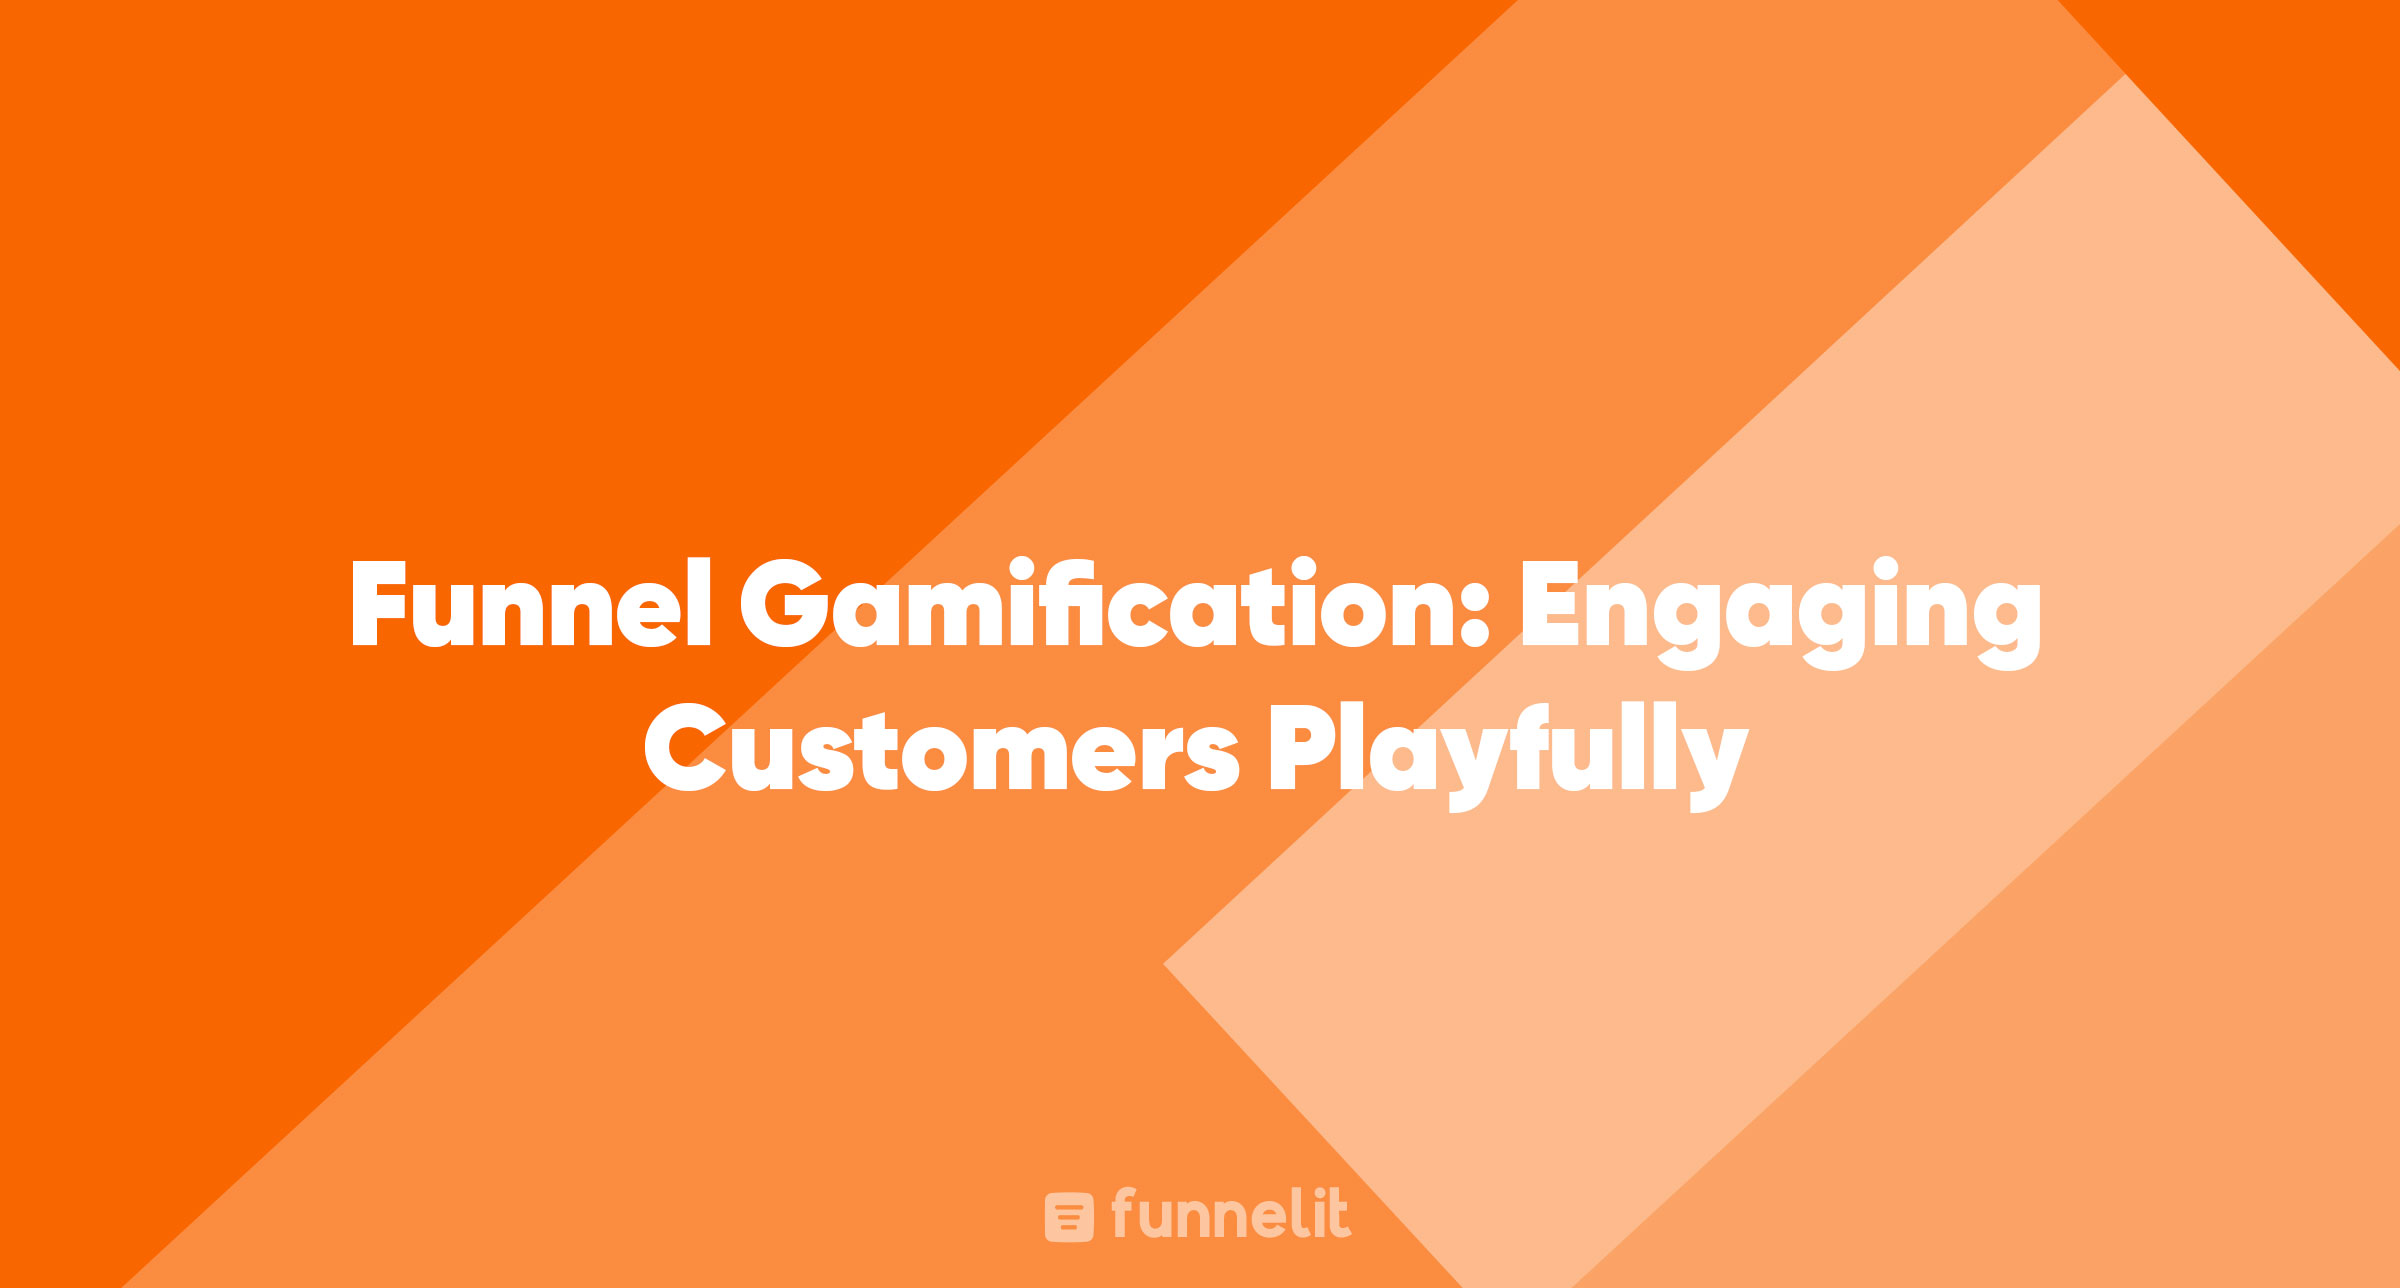 Article | Funnel Gamification: Engaging Customers Playfully